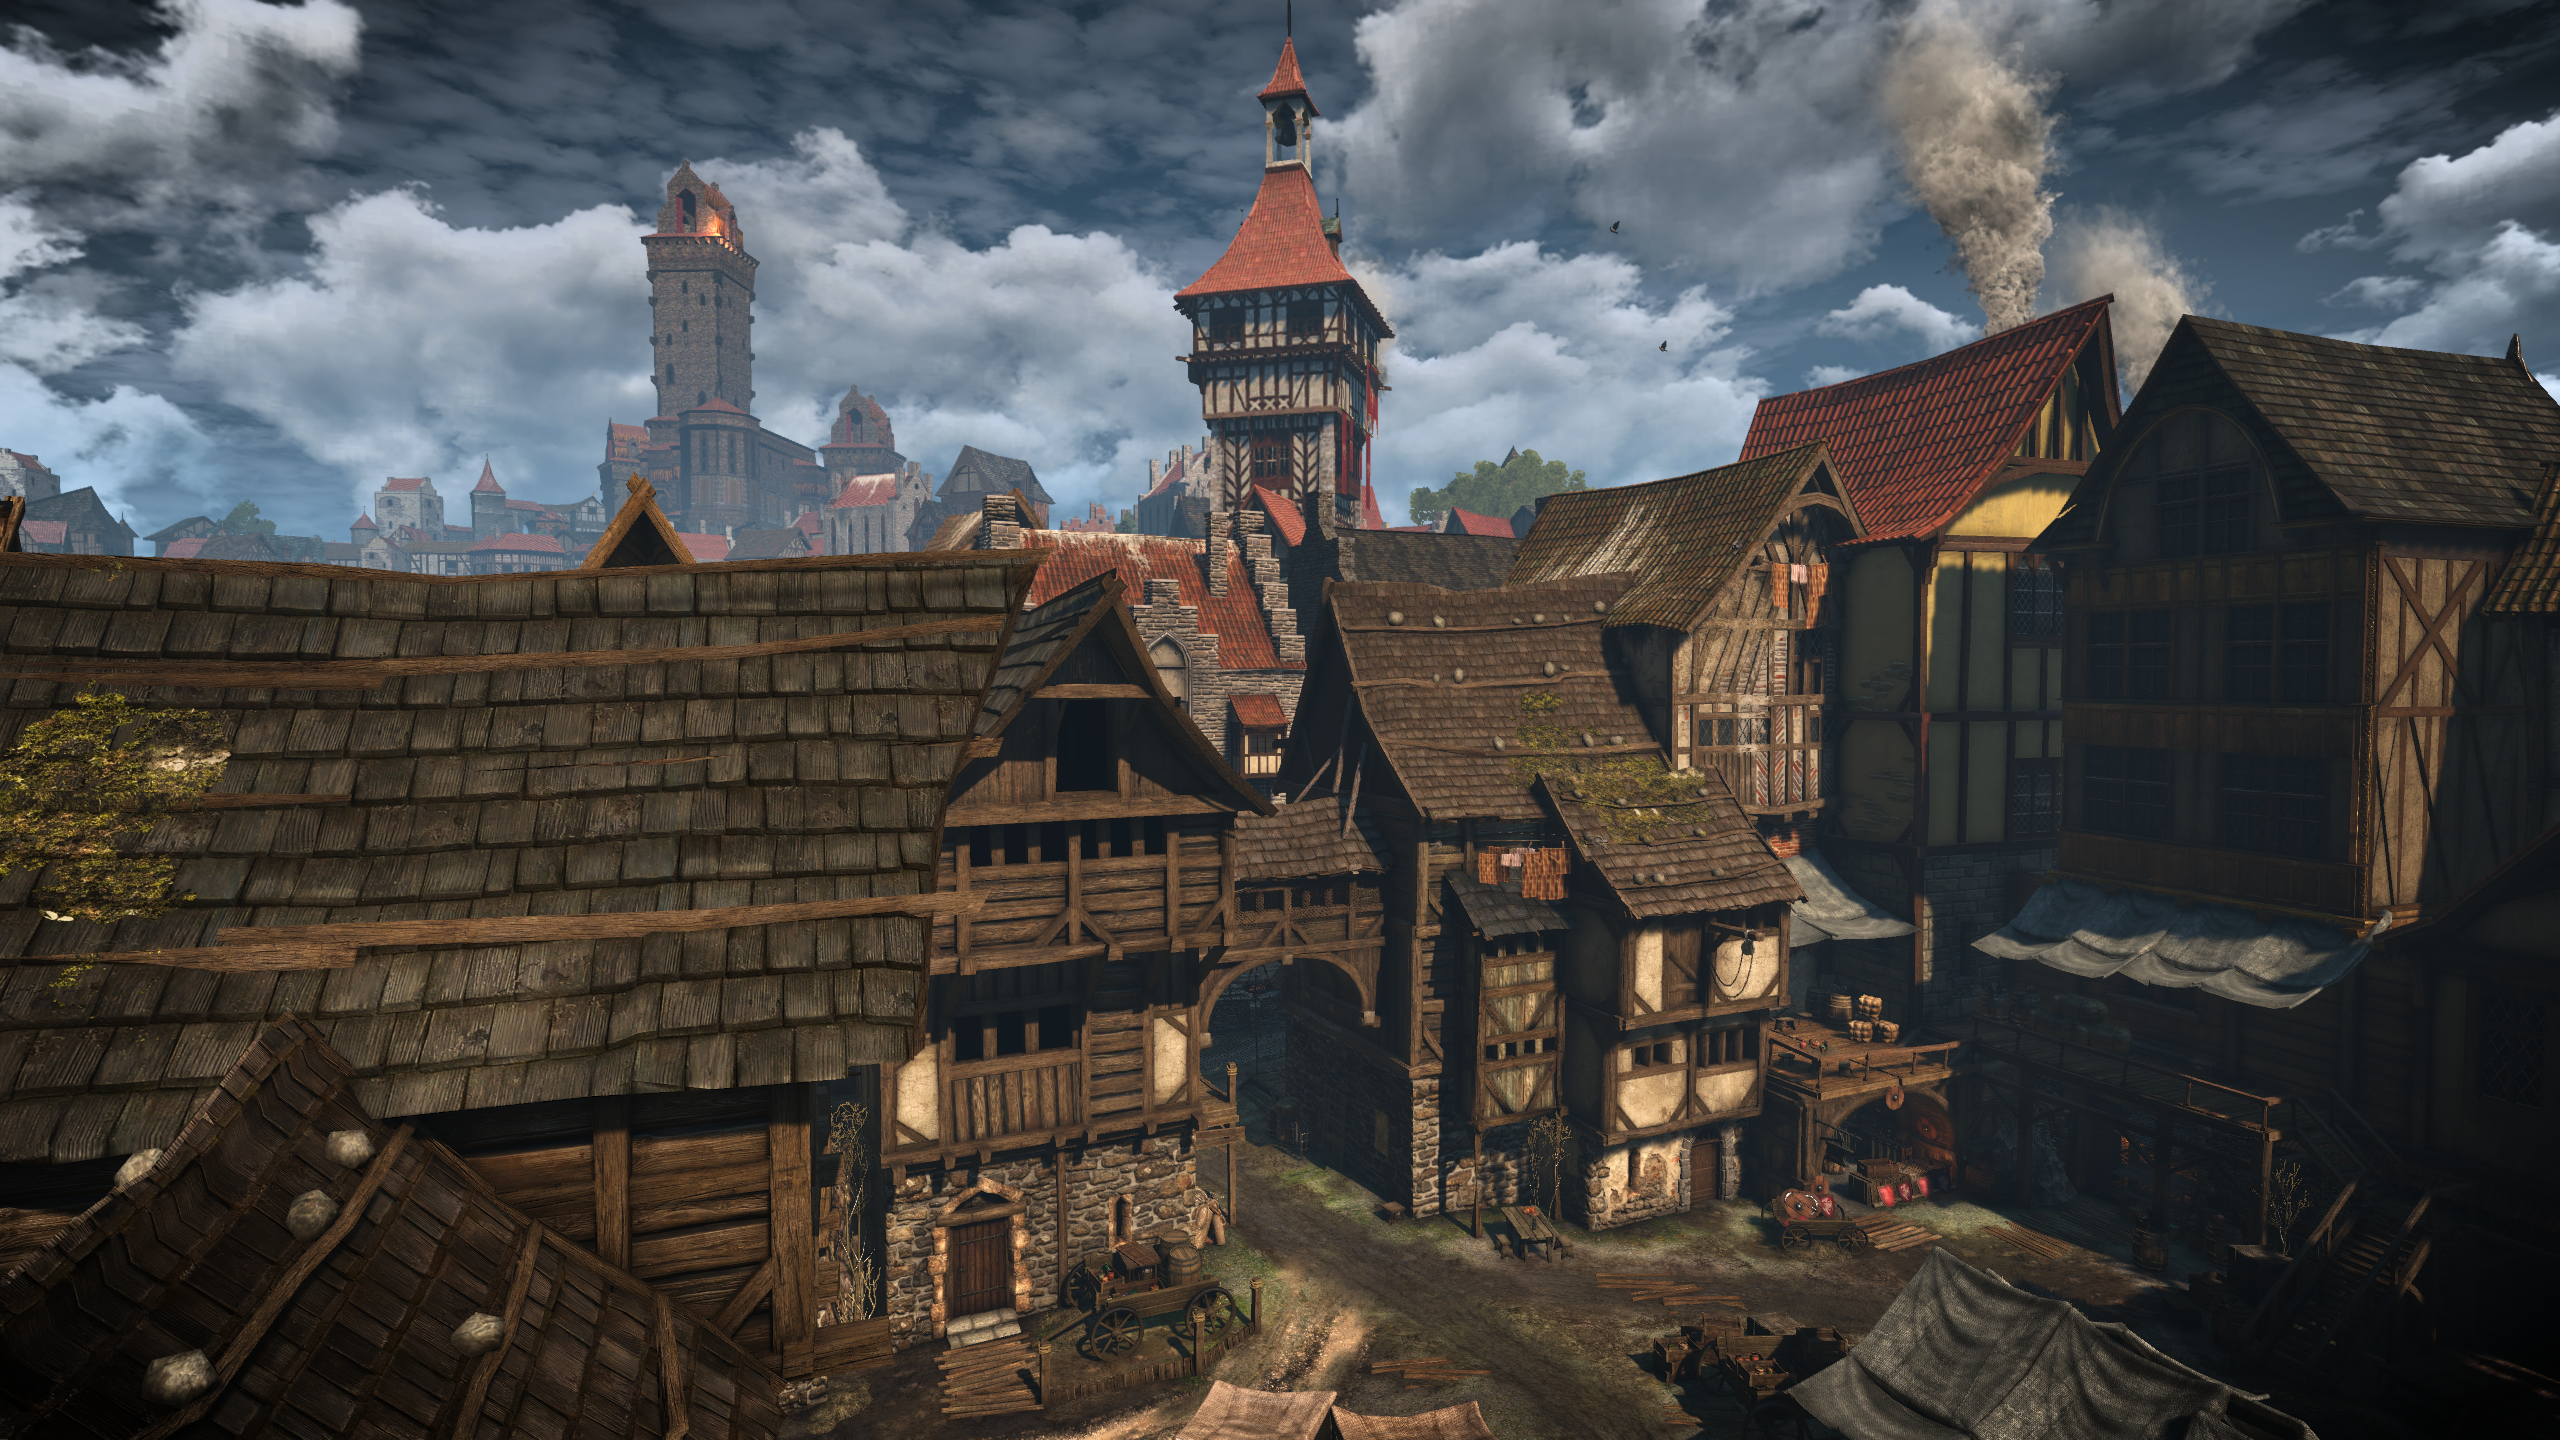 General 2560x1440 The Witcher 3: Wild Hunt Novigrad video games The Witcher fantasy town fantasy city CD Projekt RED